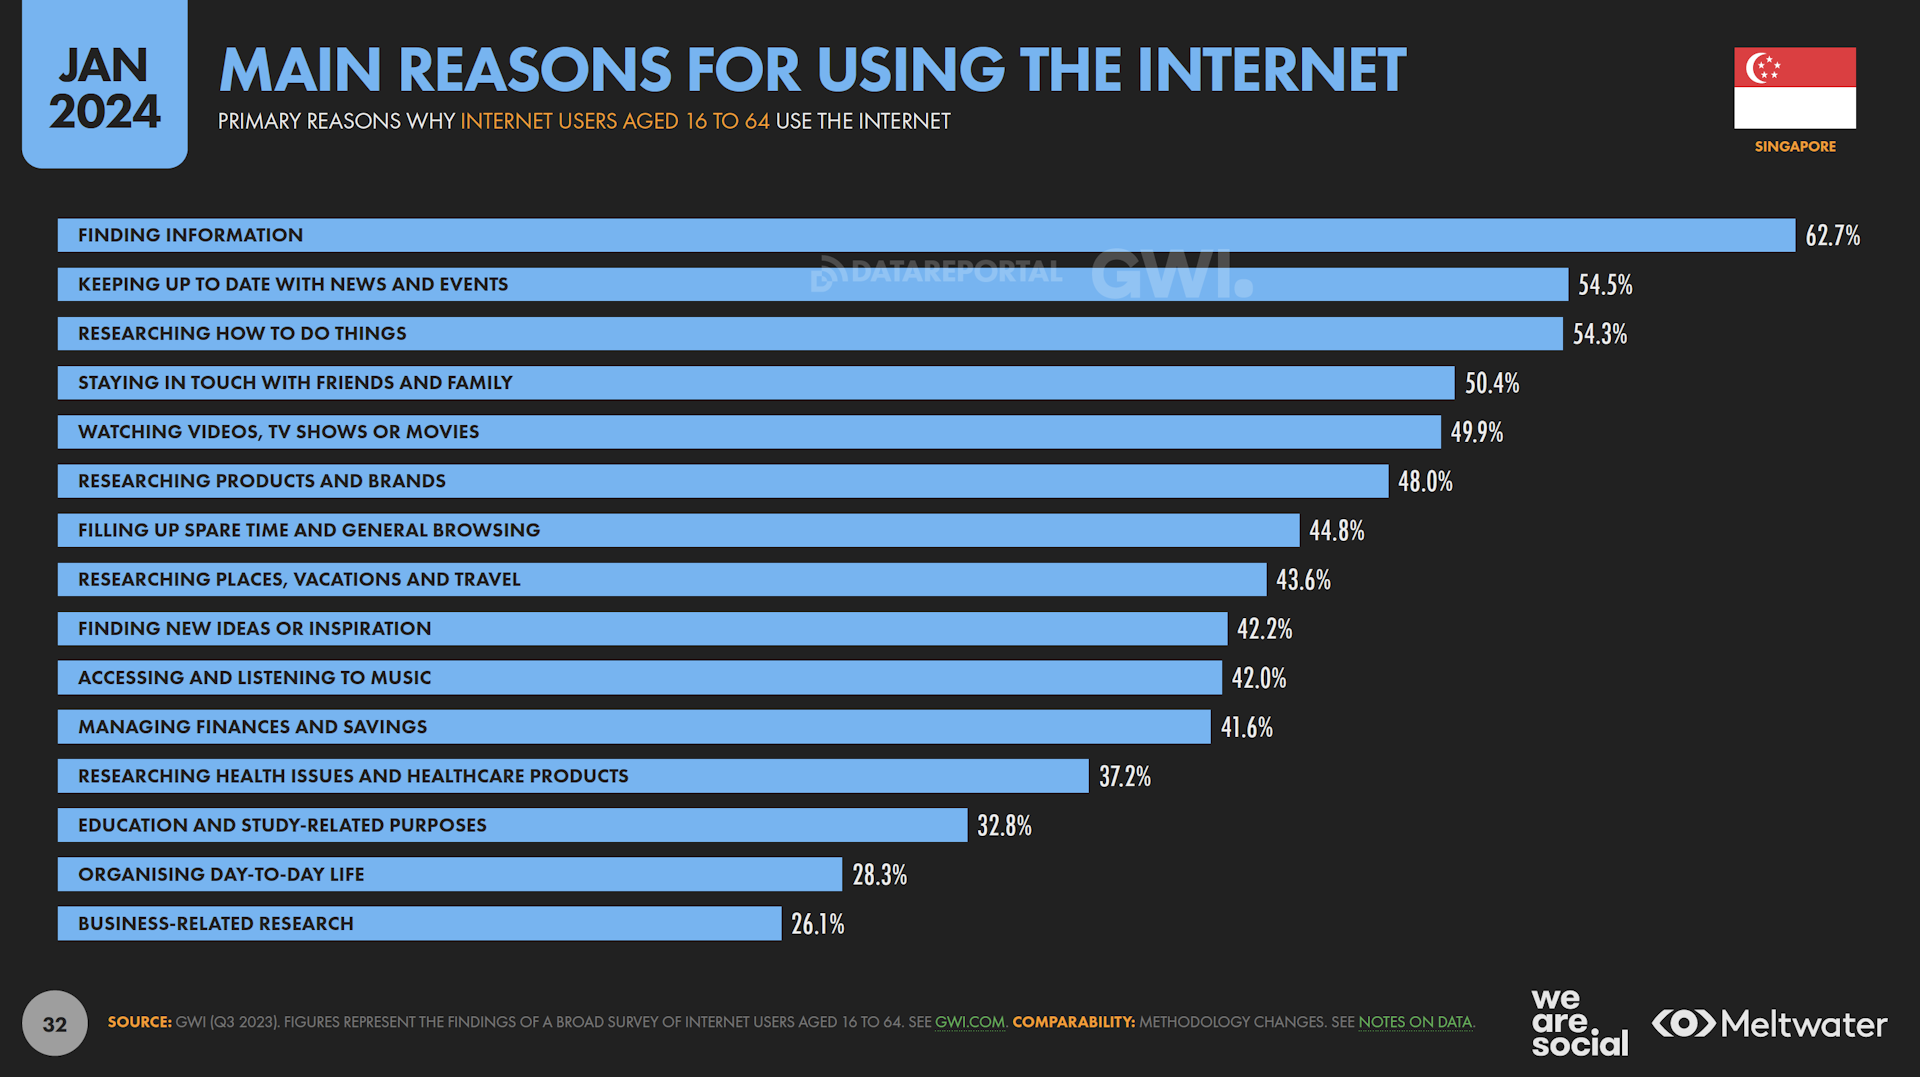 Main reasons for using the internet based on Global Digital Report 2024 for Singapore